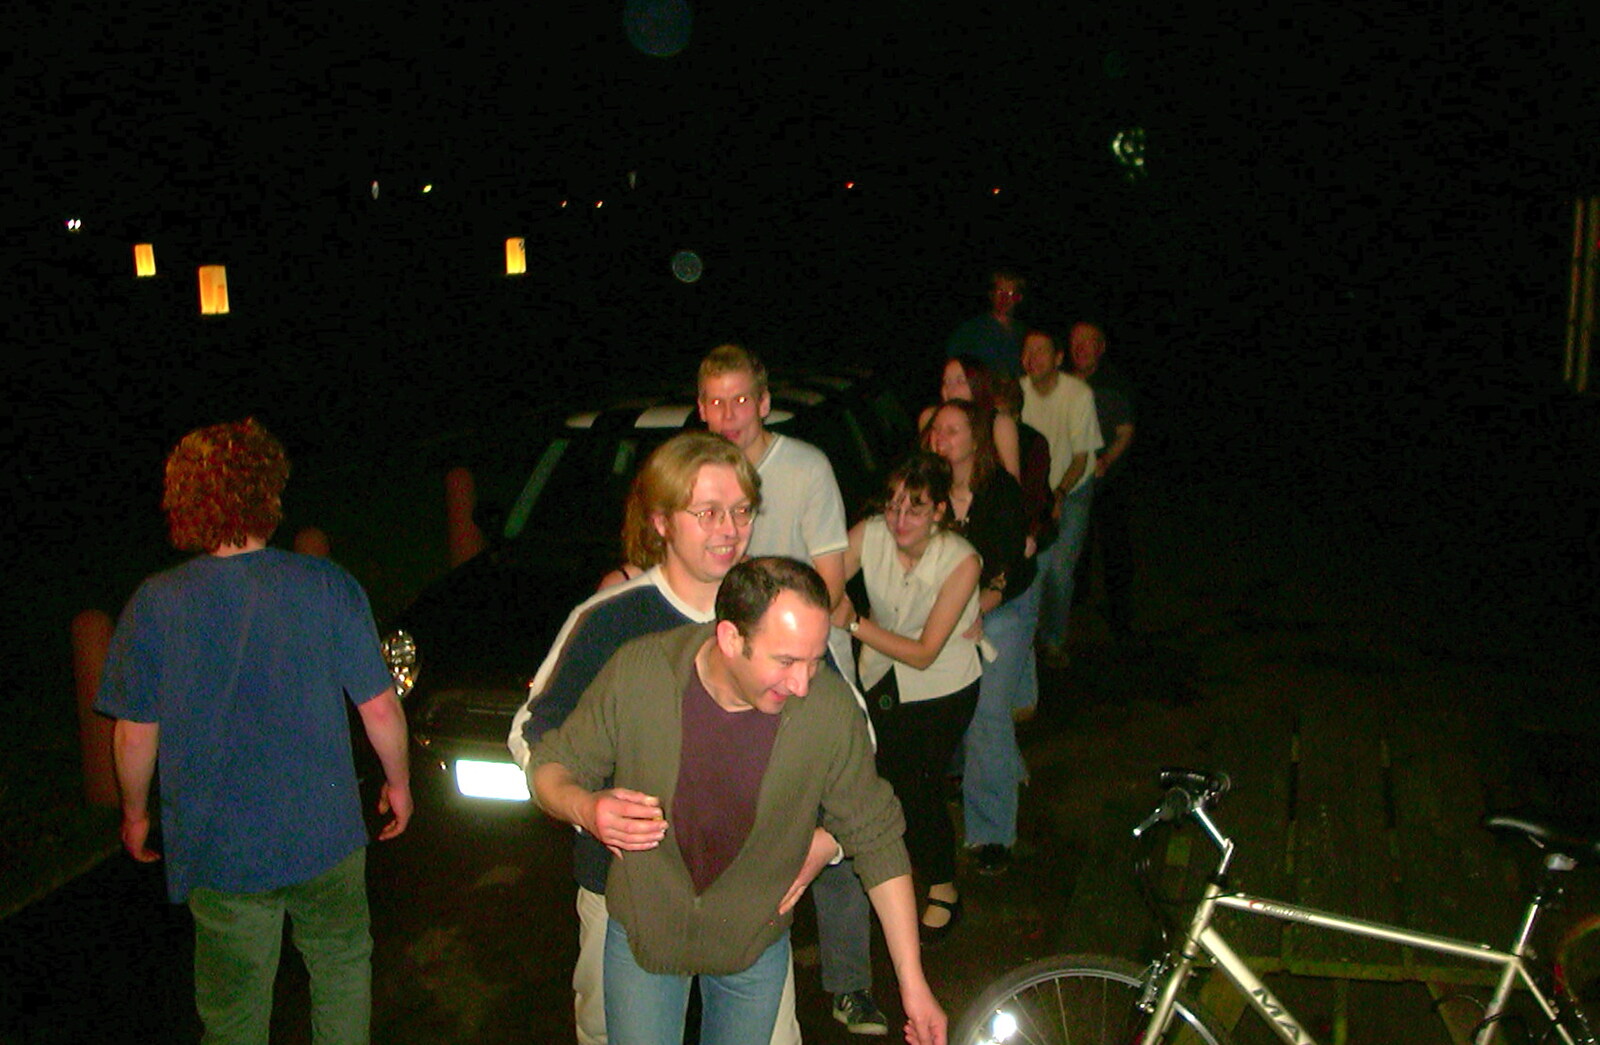 New Year's Eve at the Swan Inn, Brome, Suffolk - 31st December 2002: The conga goes around the car park